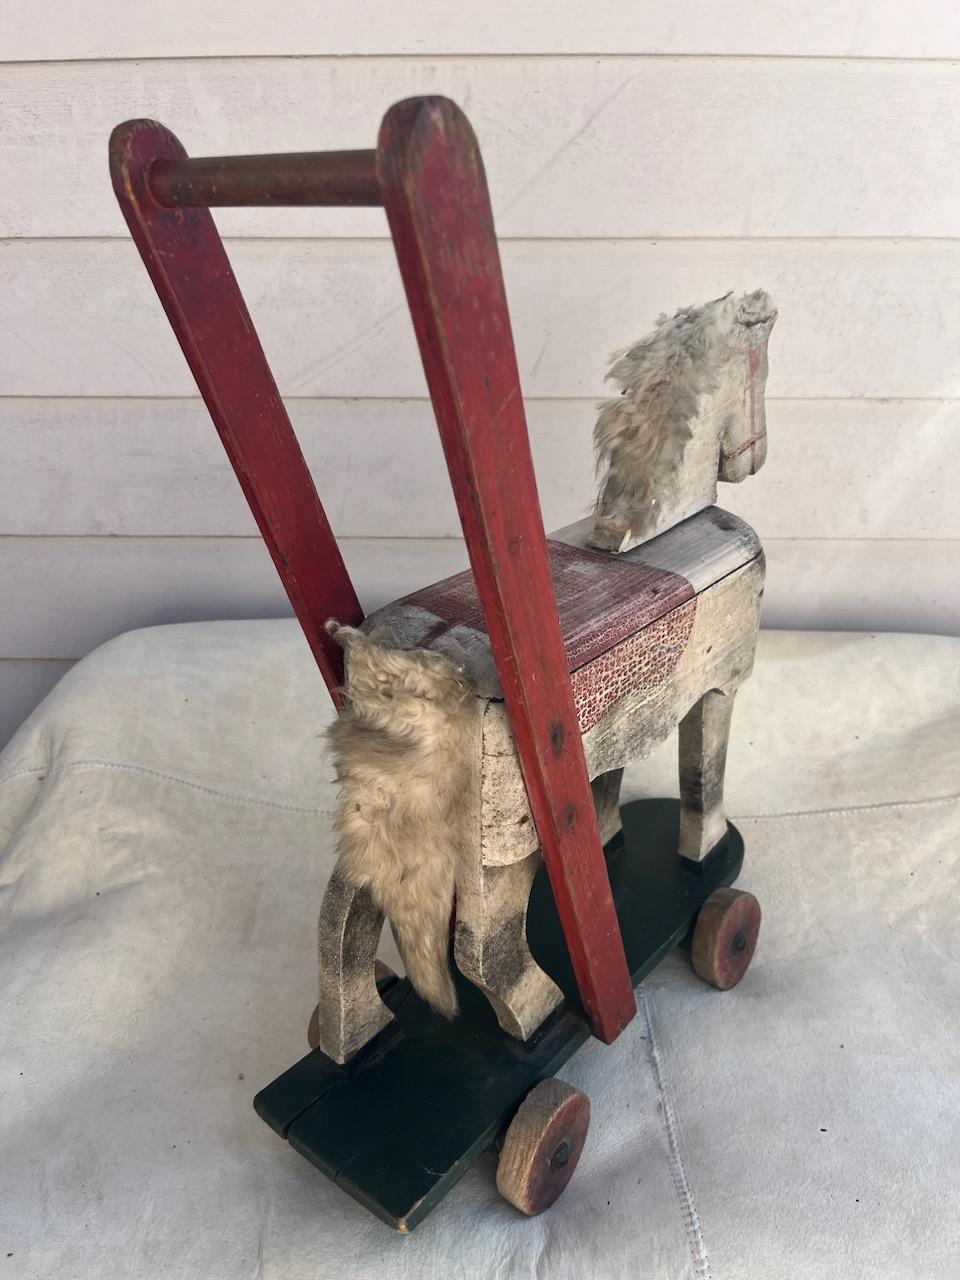 19thc original painted & hand crafted pull toy horse on wheels for that country home or toy collector. Fantastic original surface paint.